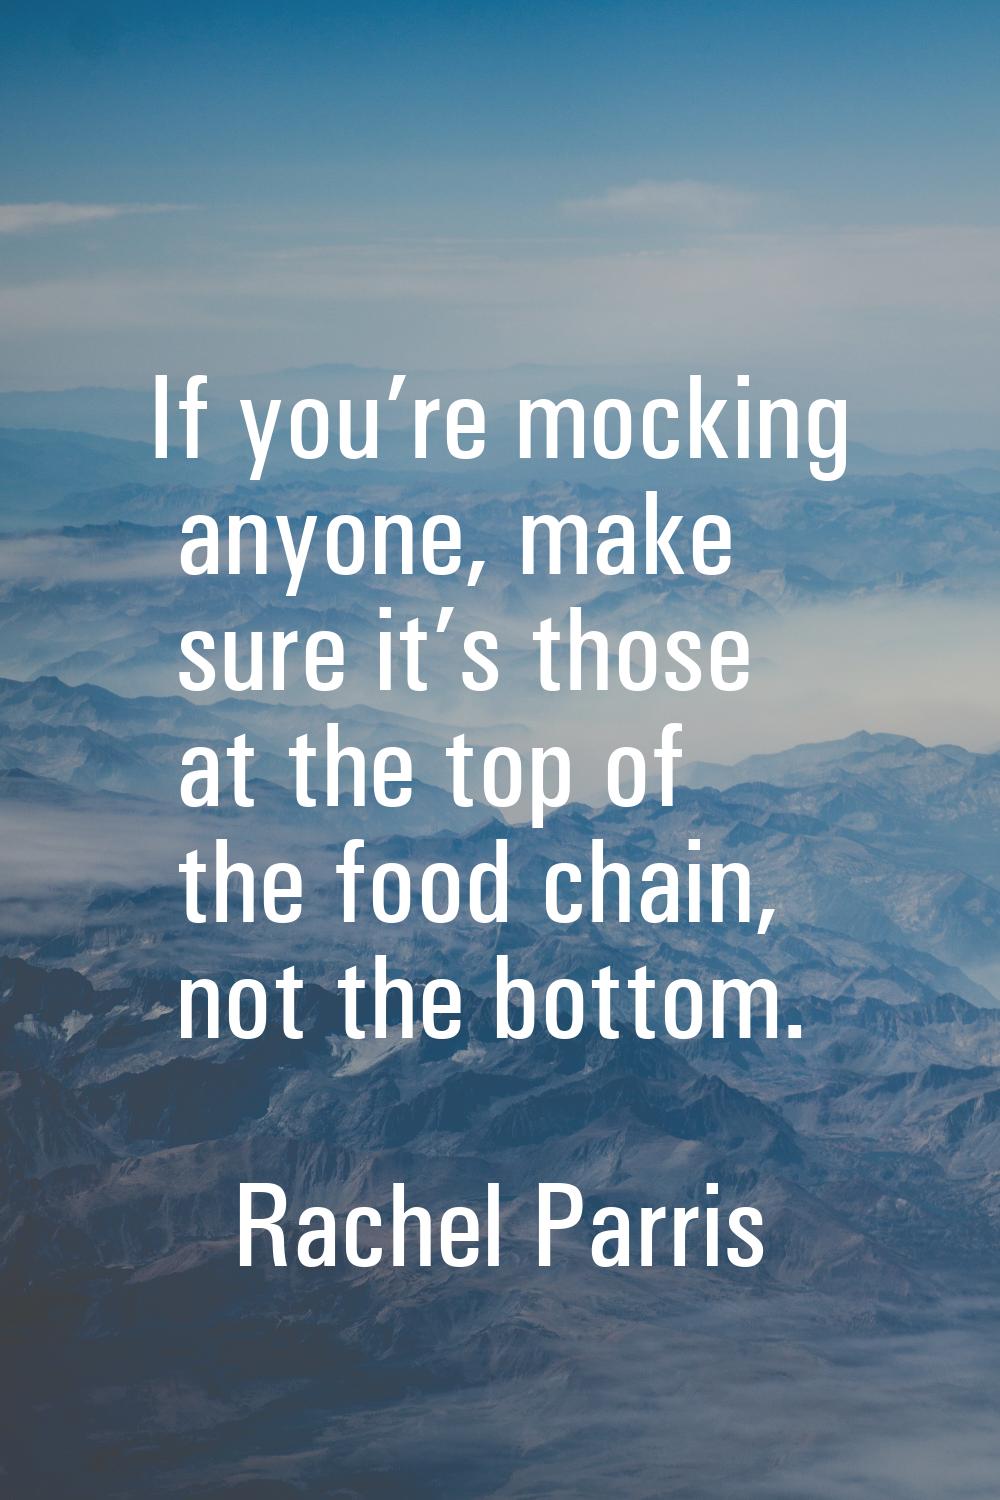 If you’re mocking anyone, make sure it’s those at the top of the food chain, not the bottom.